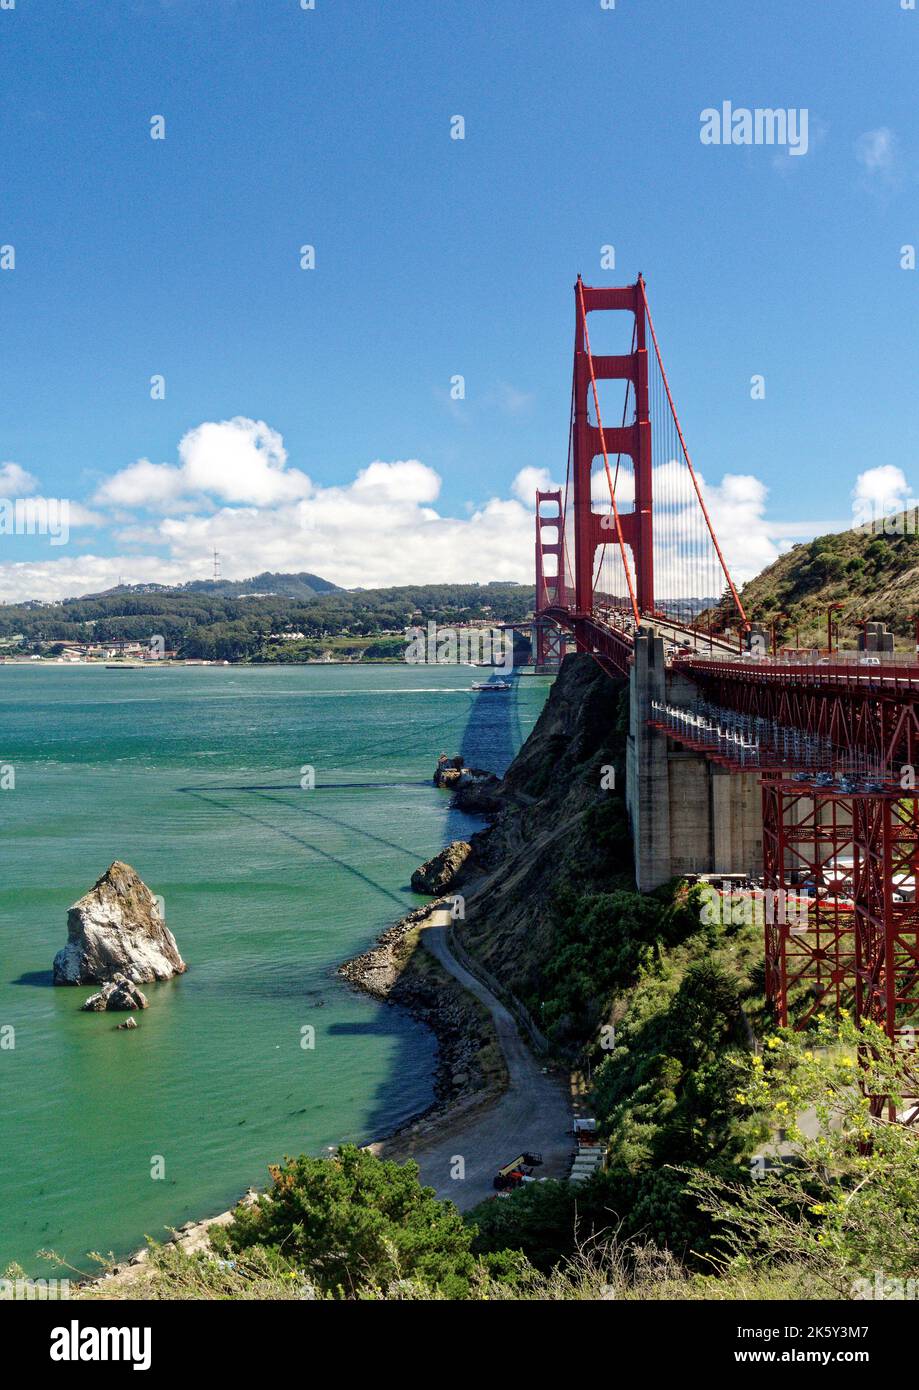 The Golden Gate Bridge, San Francisco seen from the North Vista Point viewpoint situated at the end of the bridge in Marin County, California. Stock Photo